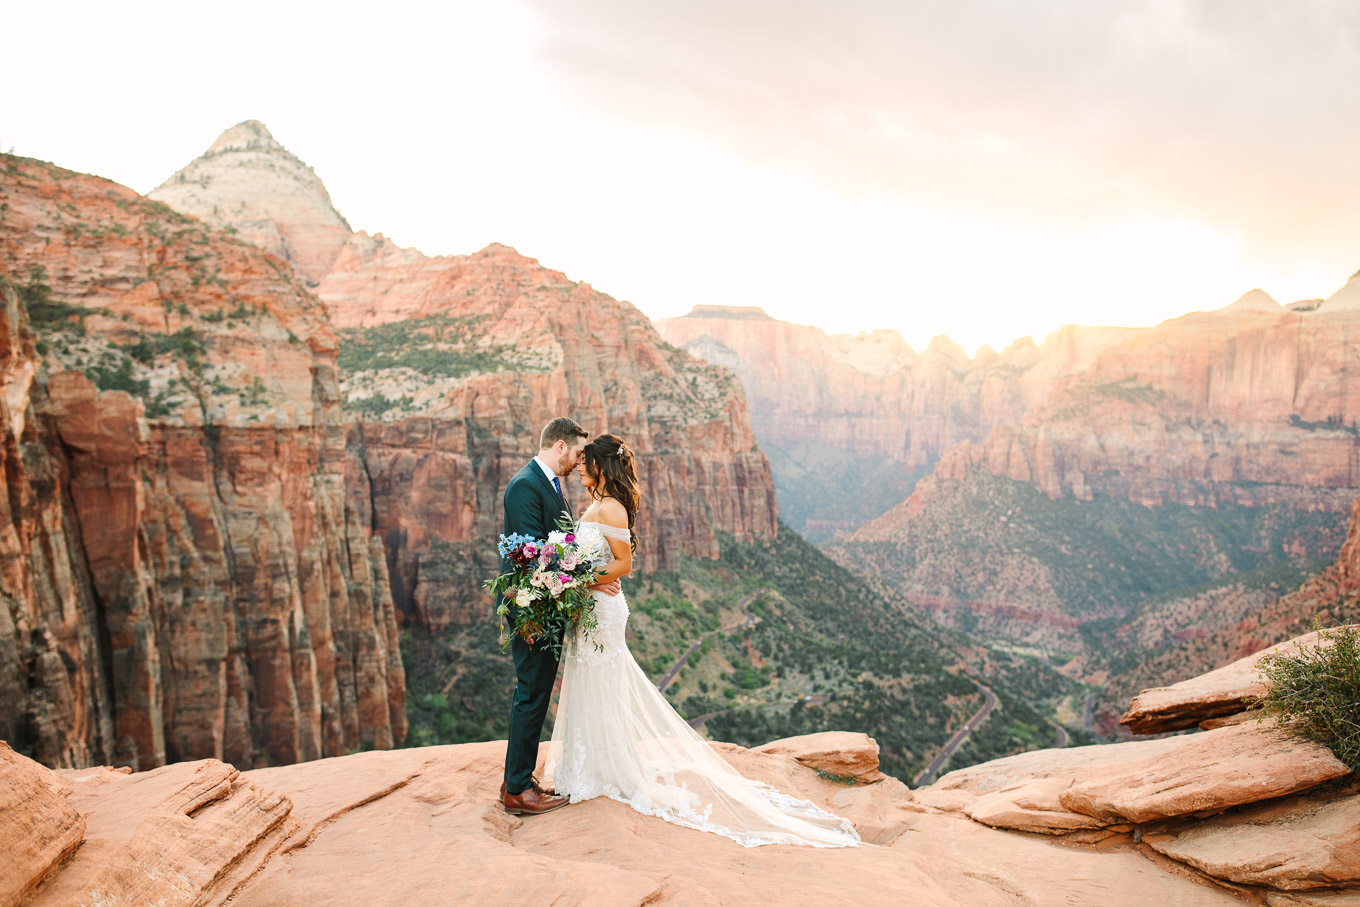 Stunning Canyon overlook | Zion National Park sunset elopement scenic overlook | Colorful adventure elopement photography | #utahelopement #zionelopement #zionwedding #undercanvaszion   Source: Mary Costa Photography | Los Angeles